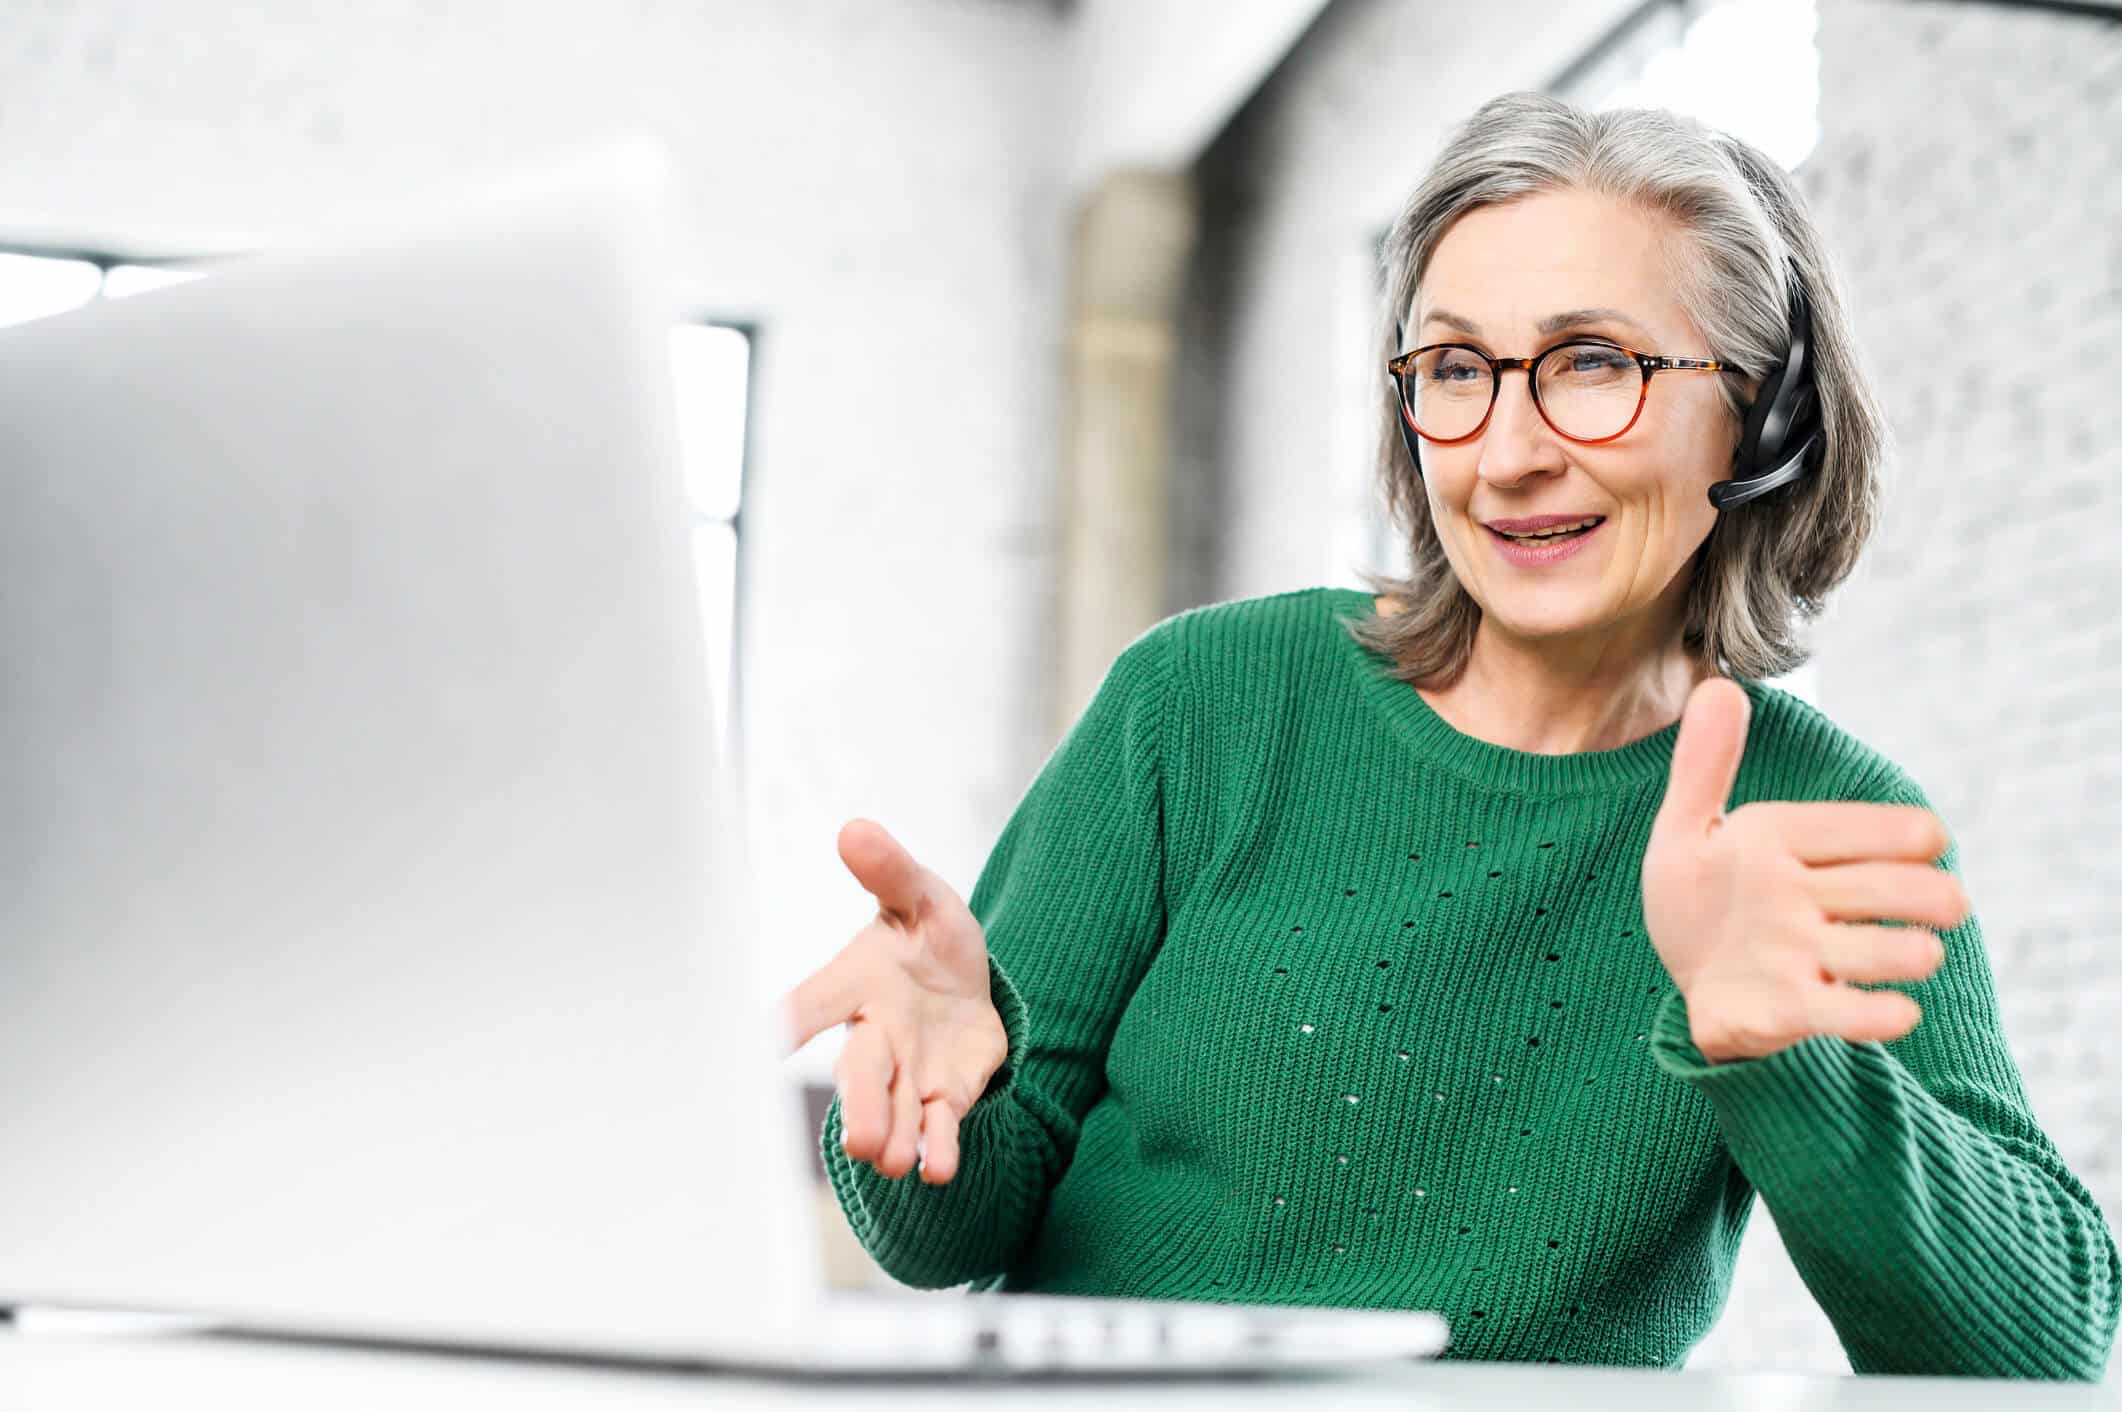 An elderly woman wearing glasses and green sweater while having an online consultation